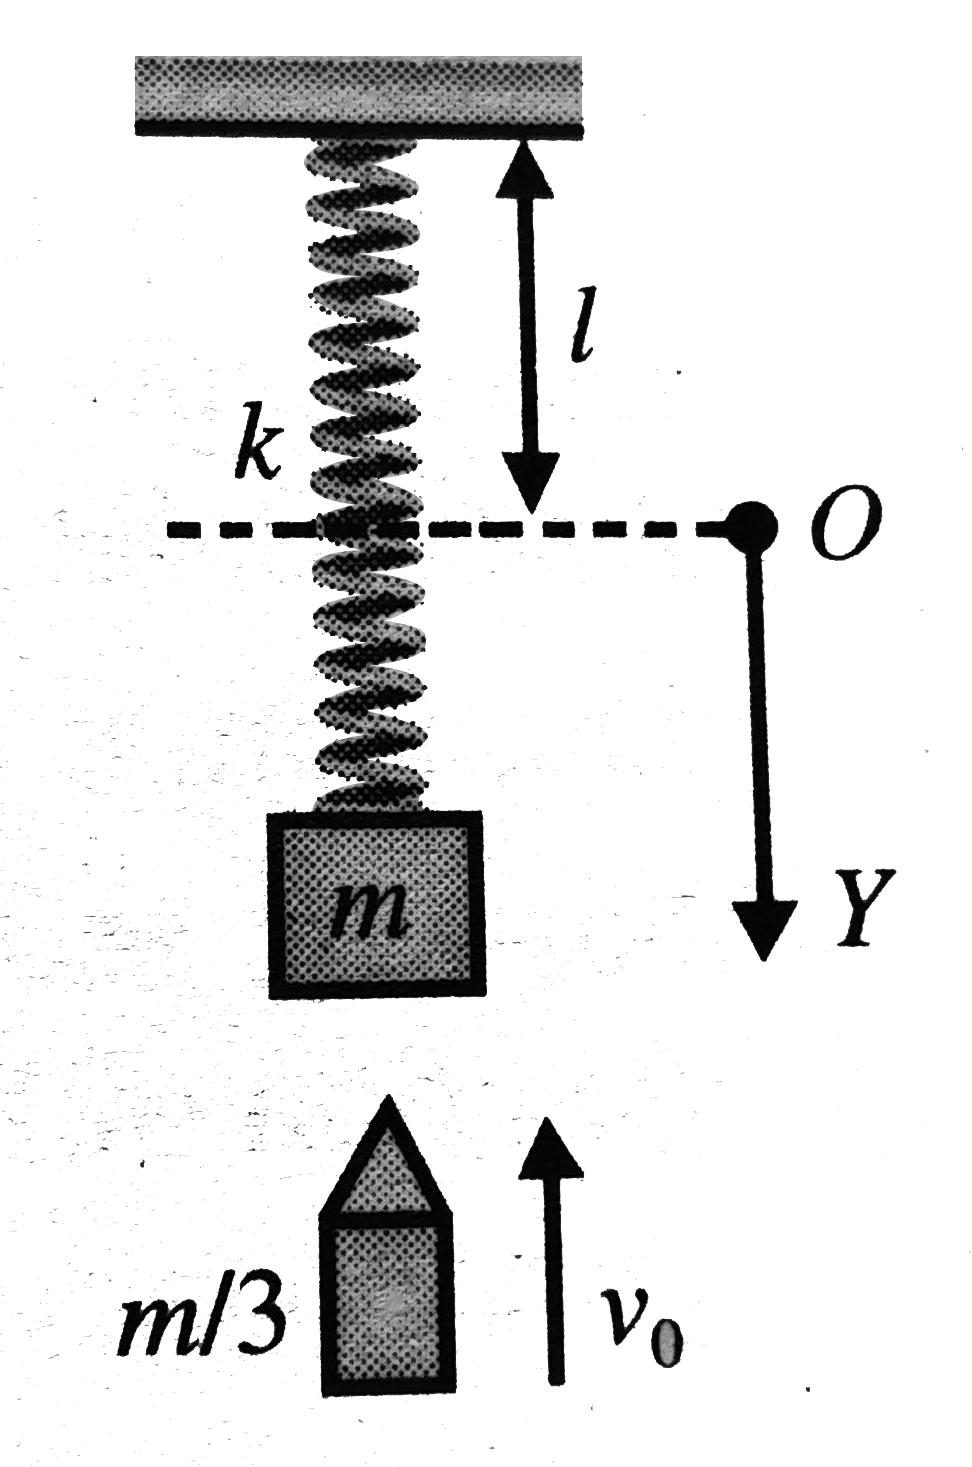 A block of mass m is suspended from one end of a light spring as shown. The origin O is considered at distance equal to natural length of the spring from the ceiling and vertical downwards direction as positive y-axis. When the system is in equilibrium a bullet of mass (m)/(3) moving in vertical up wards direction with velocity v0 strikes the block and embeds into it. As a result, the block (with bullet embedded into it) moves up and start oscillating. Based on the given information, answer the following question:   Q. The amplitude of oscillation would be